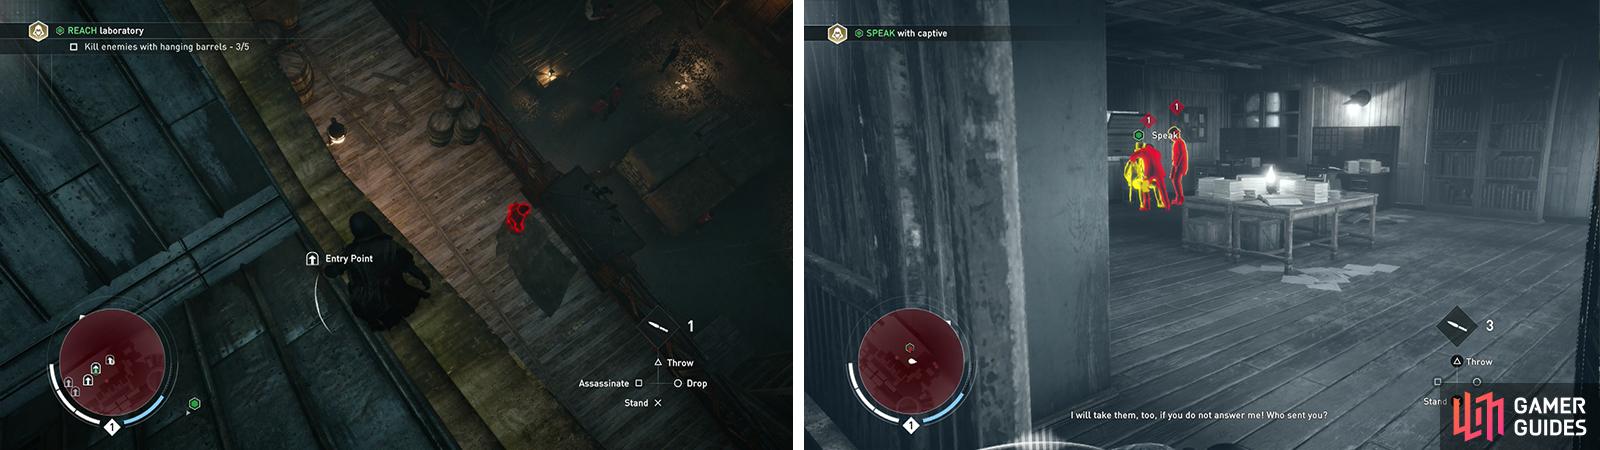 The easiest entry is via a balcony on the eastern side of the building (left). Find the target inside and kill his captors (right).